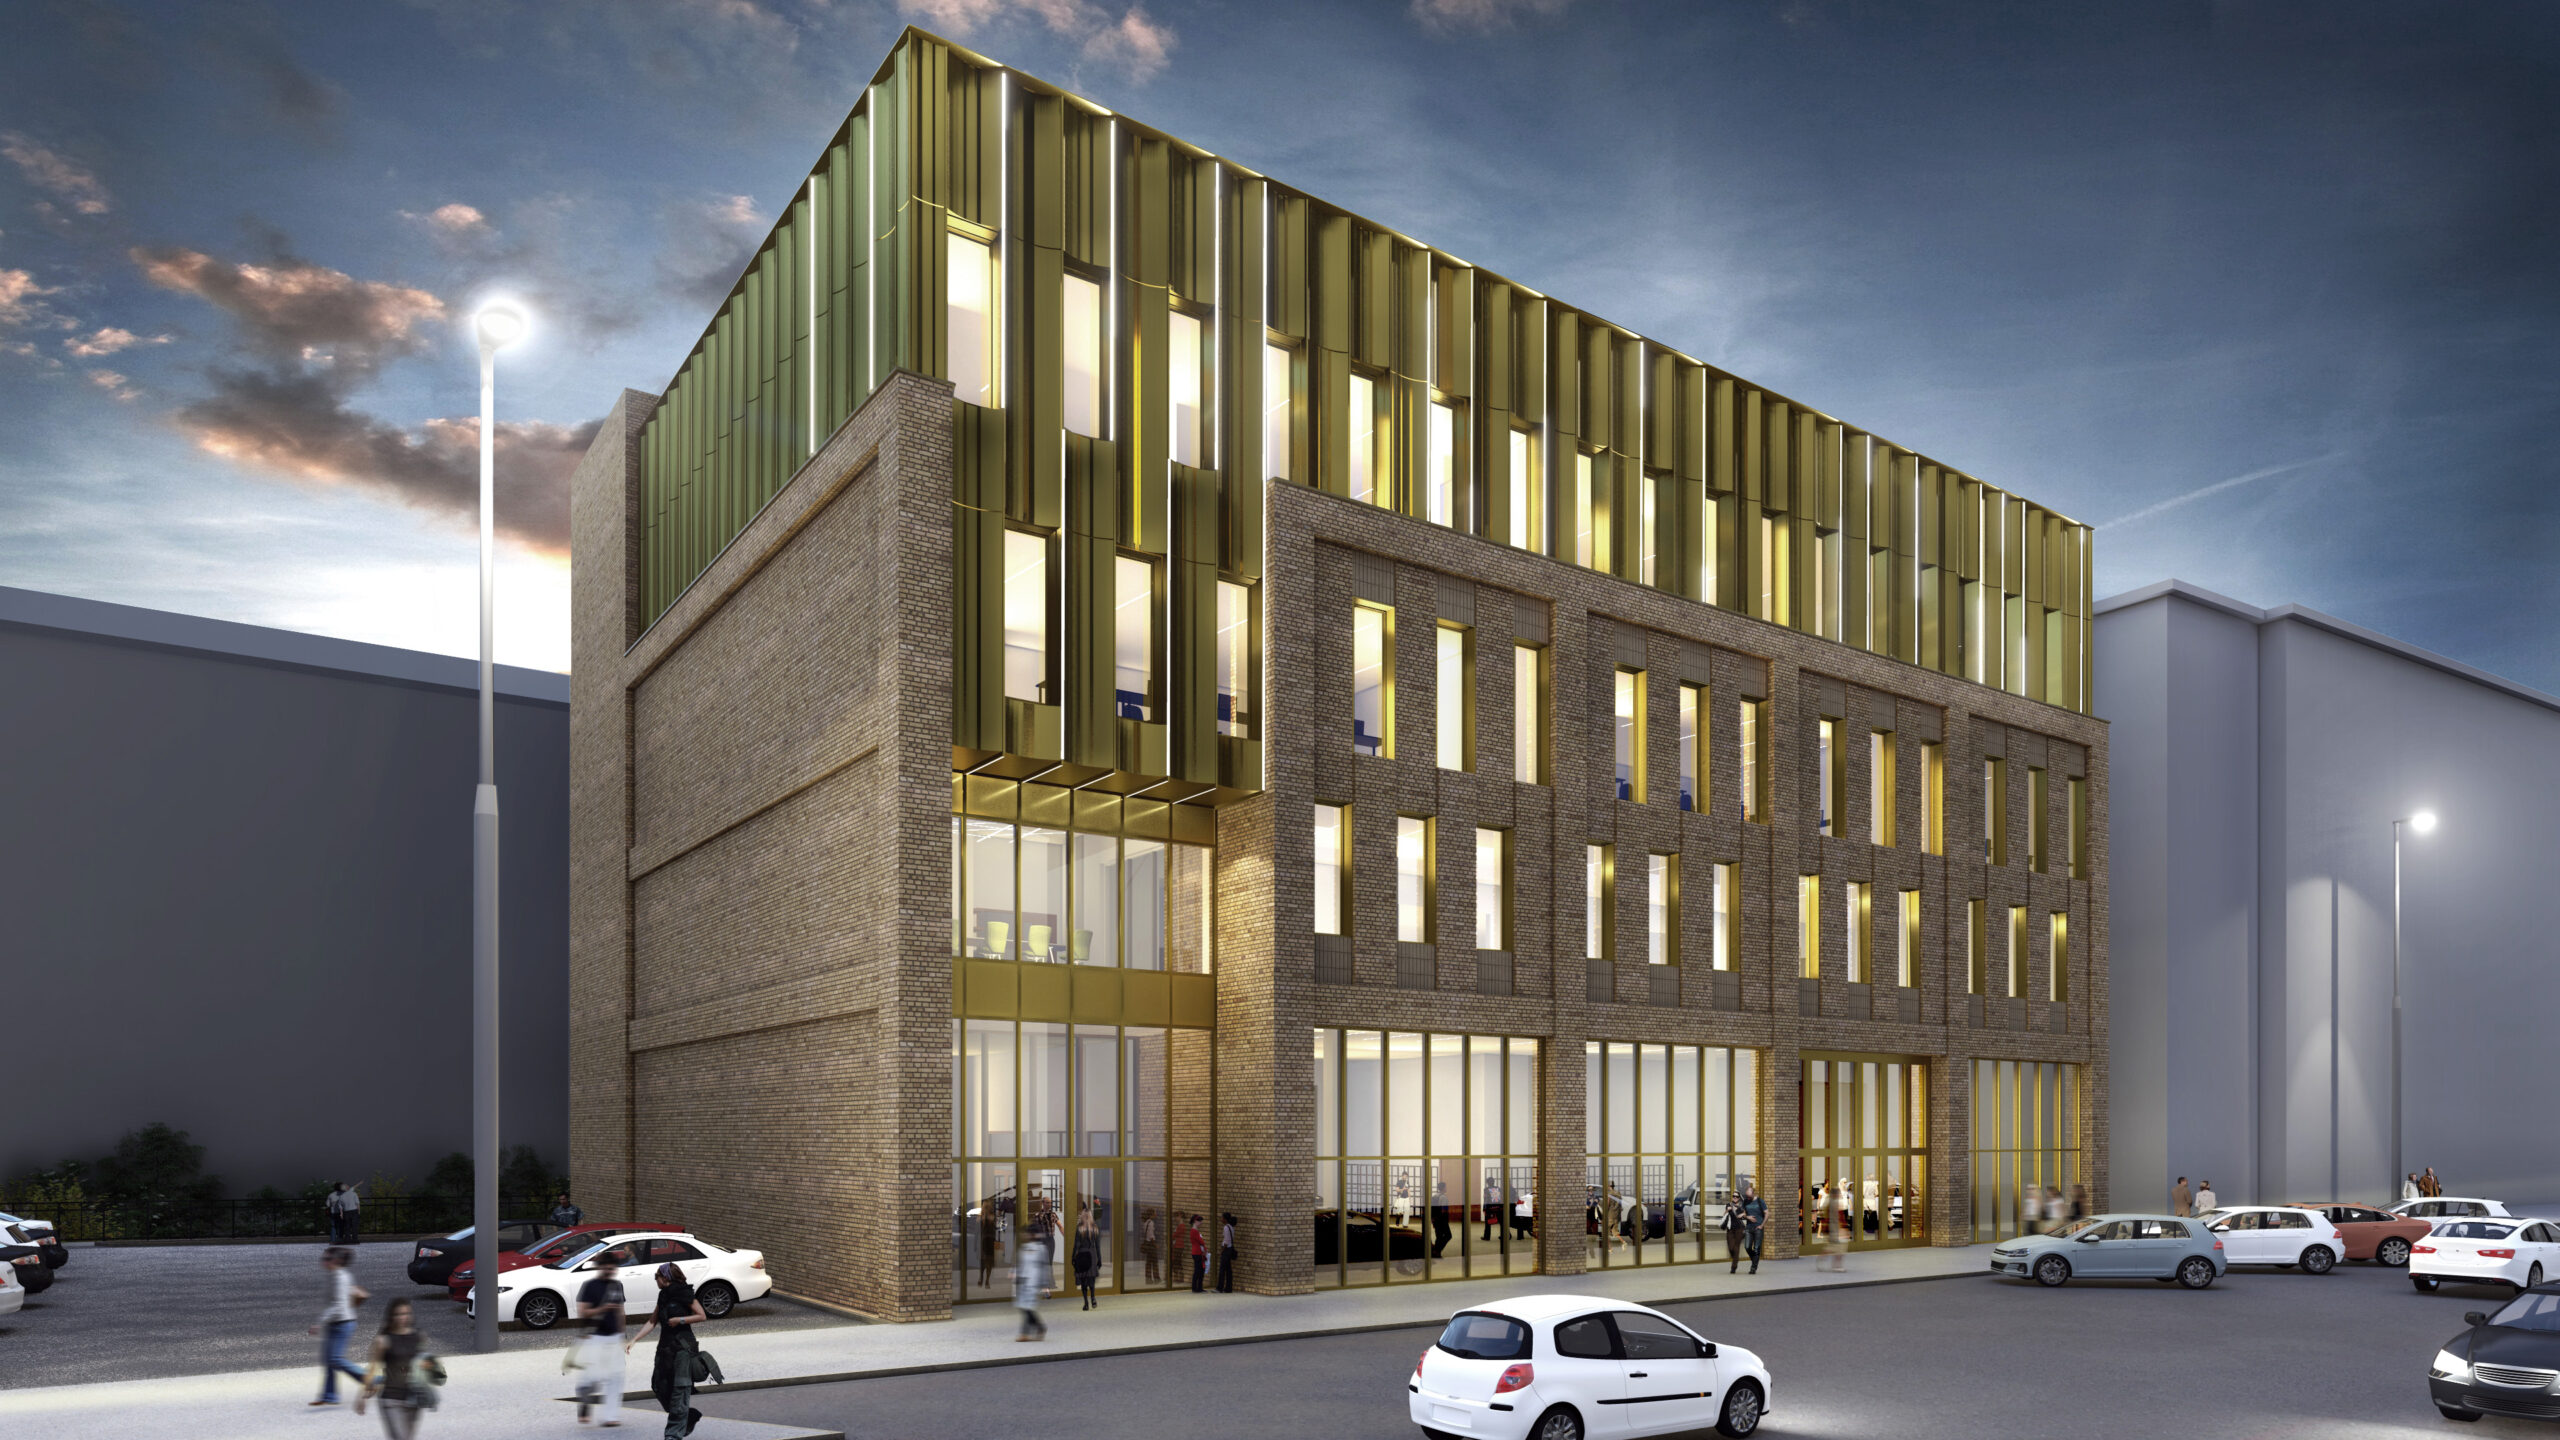 Bradford College Cements Ambitious Plans for Transformational Campus Buildings